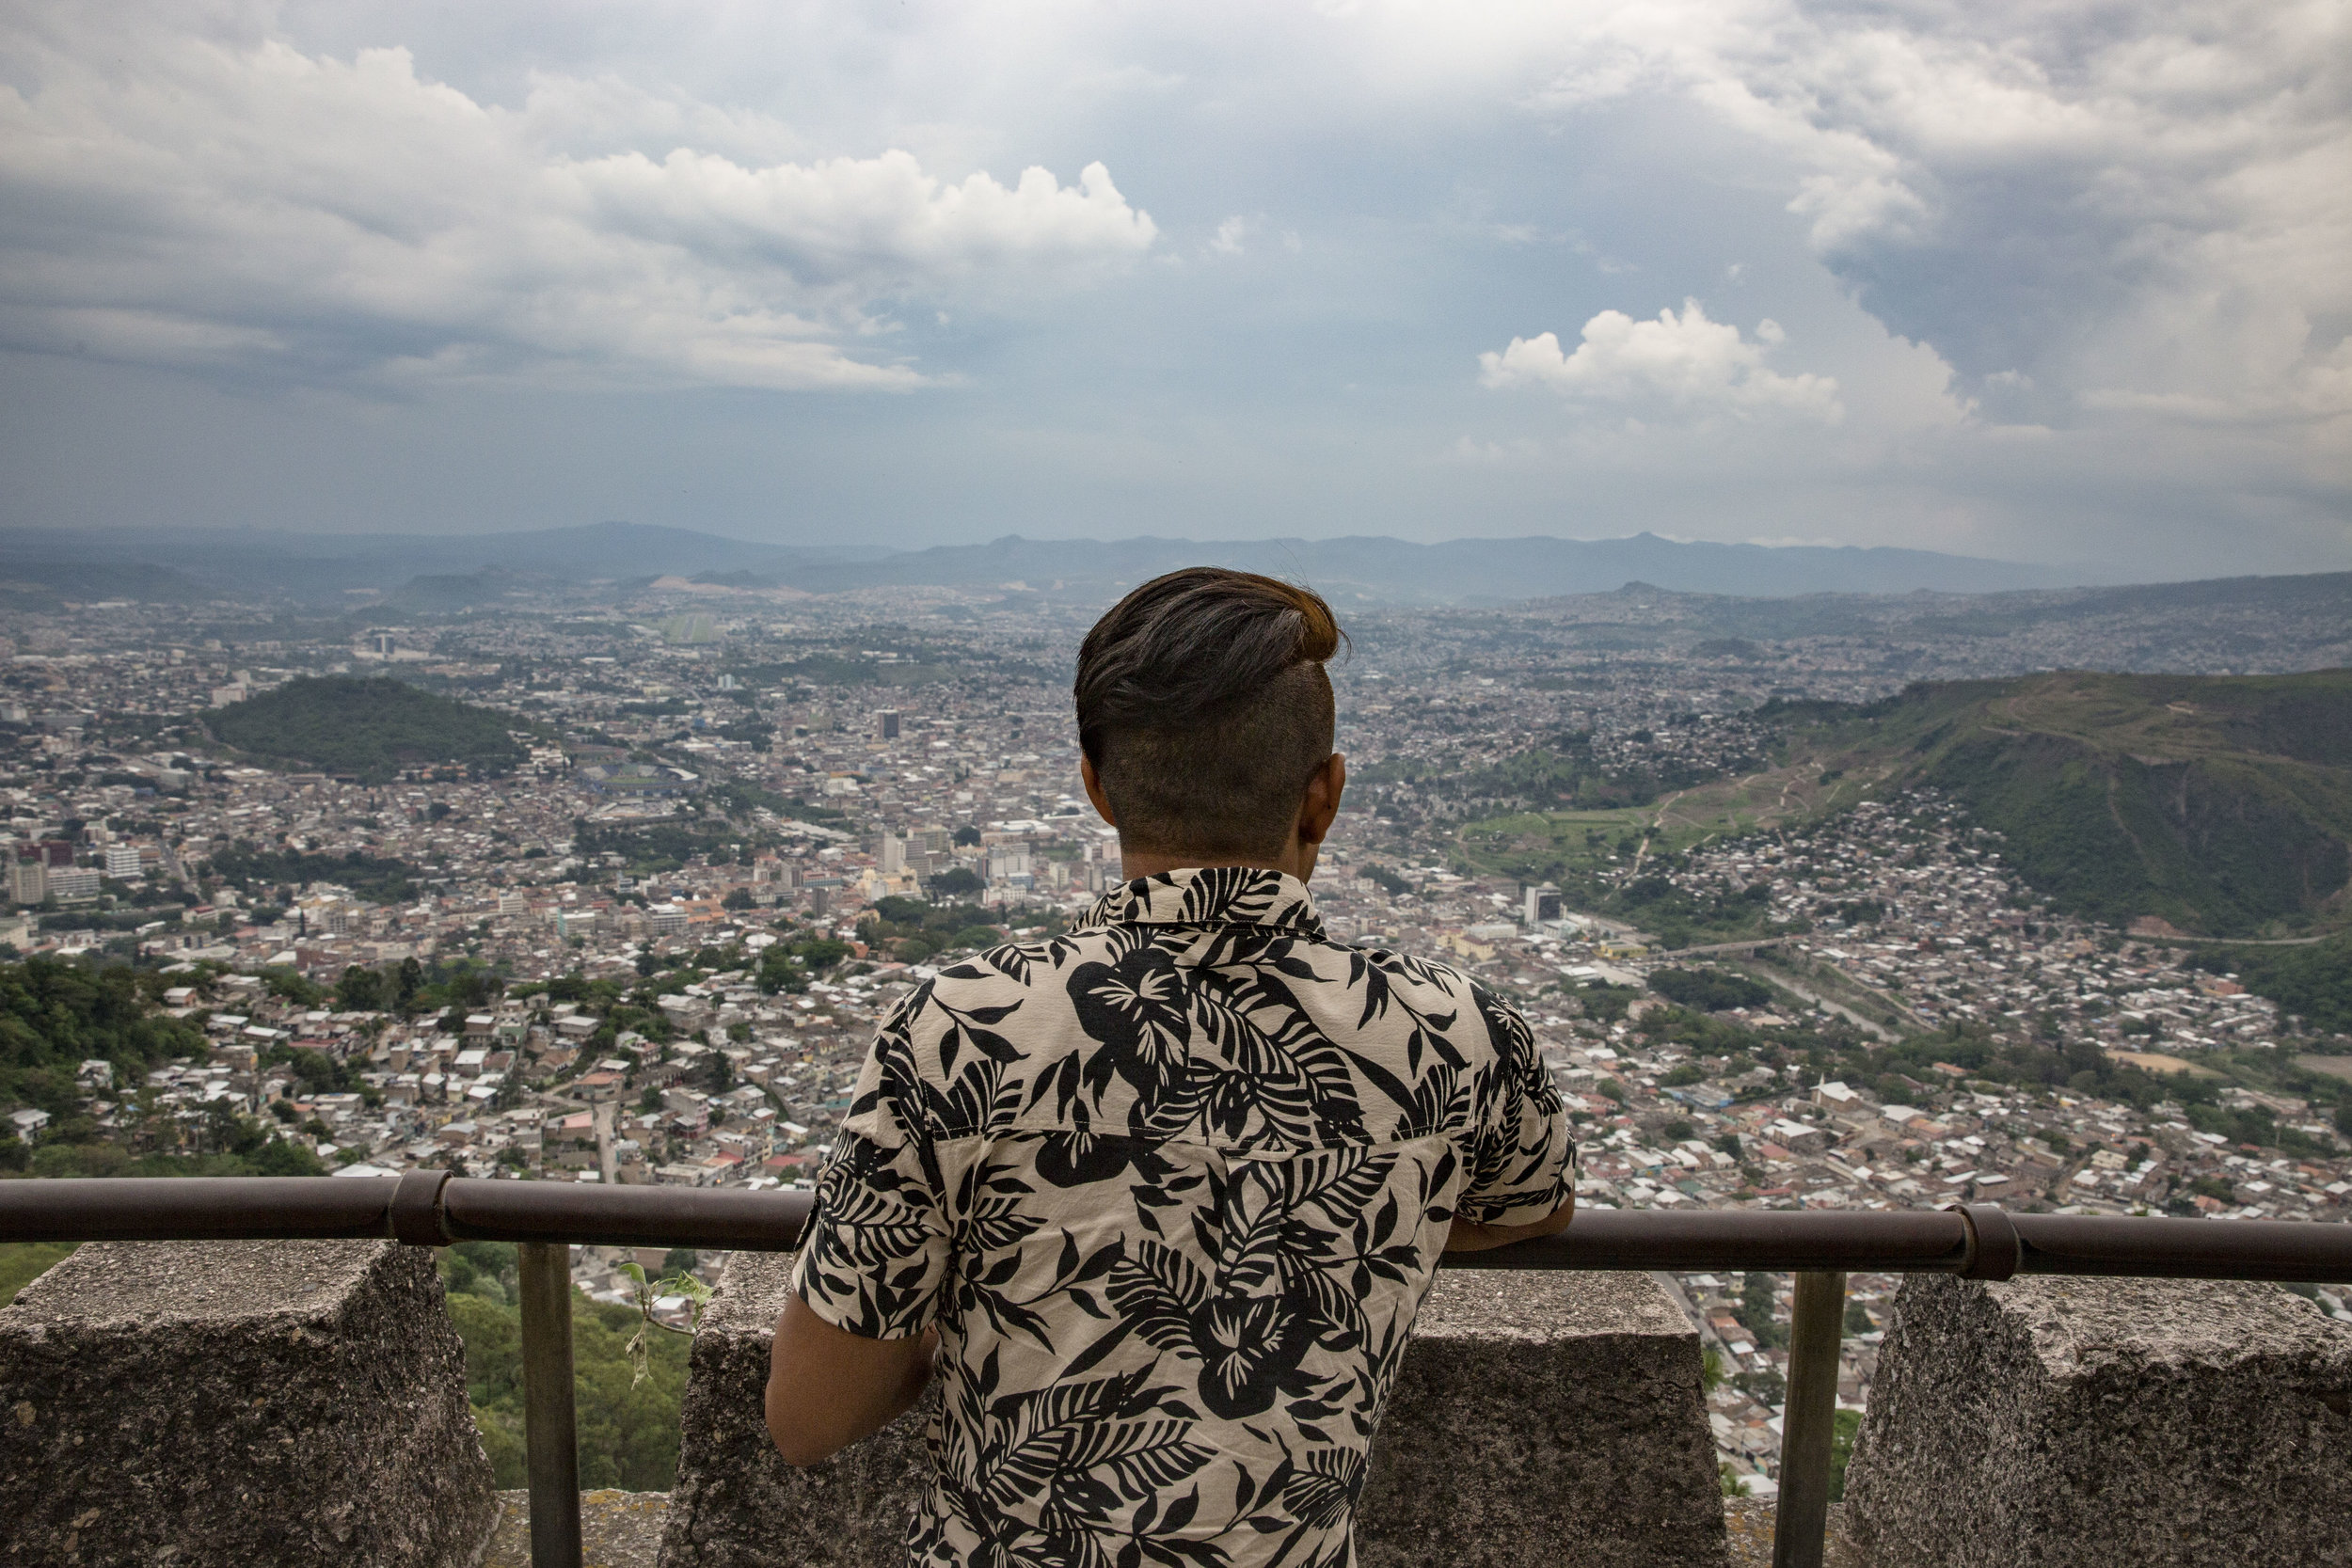  Darwin overlooking Tegucigalpa, where he lives. Darwin is not safe, he has been threaten by the same gang that murdered his brother. 